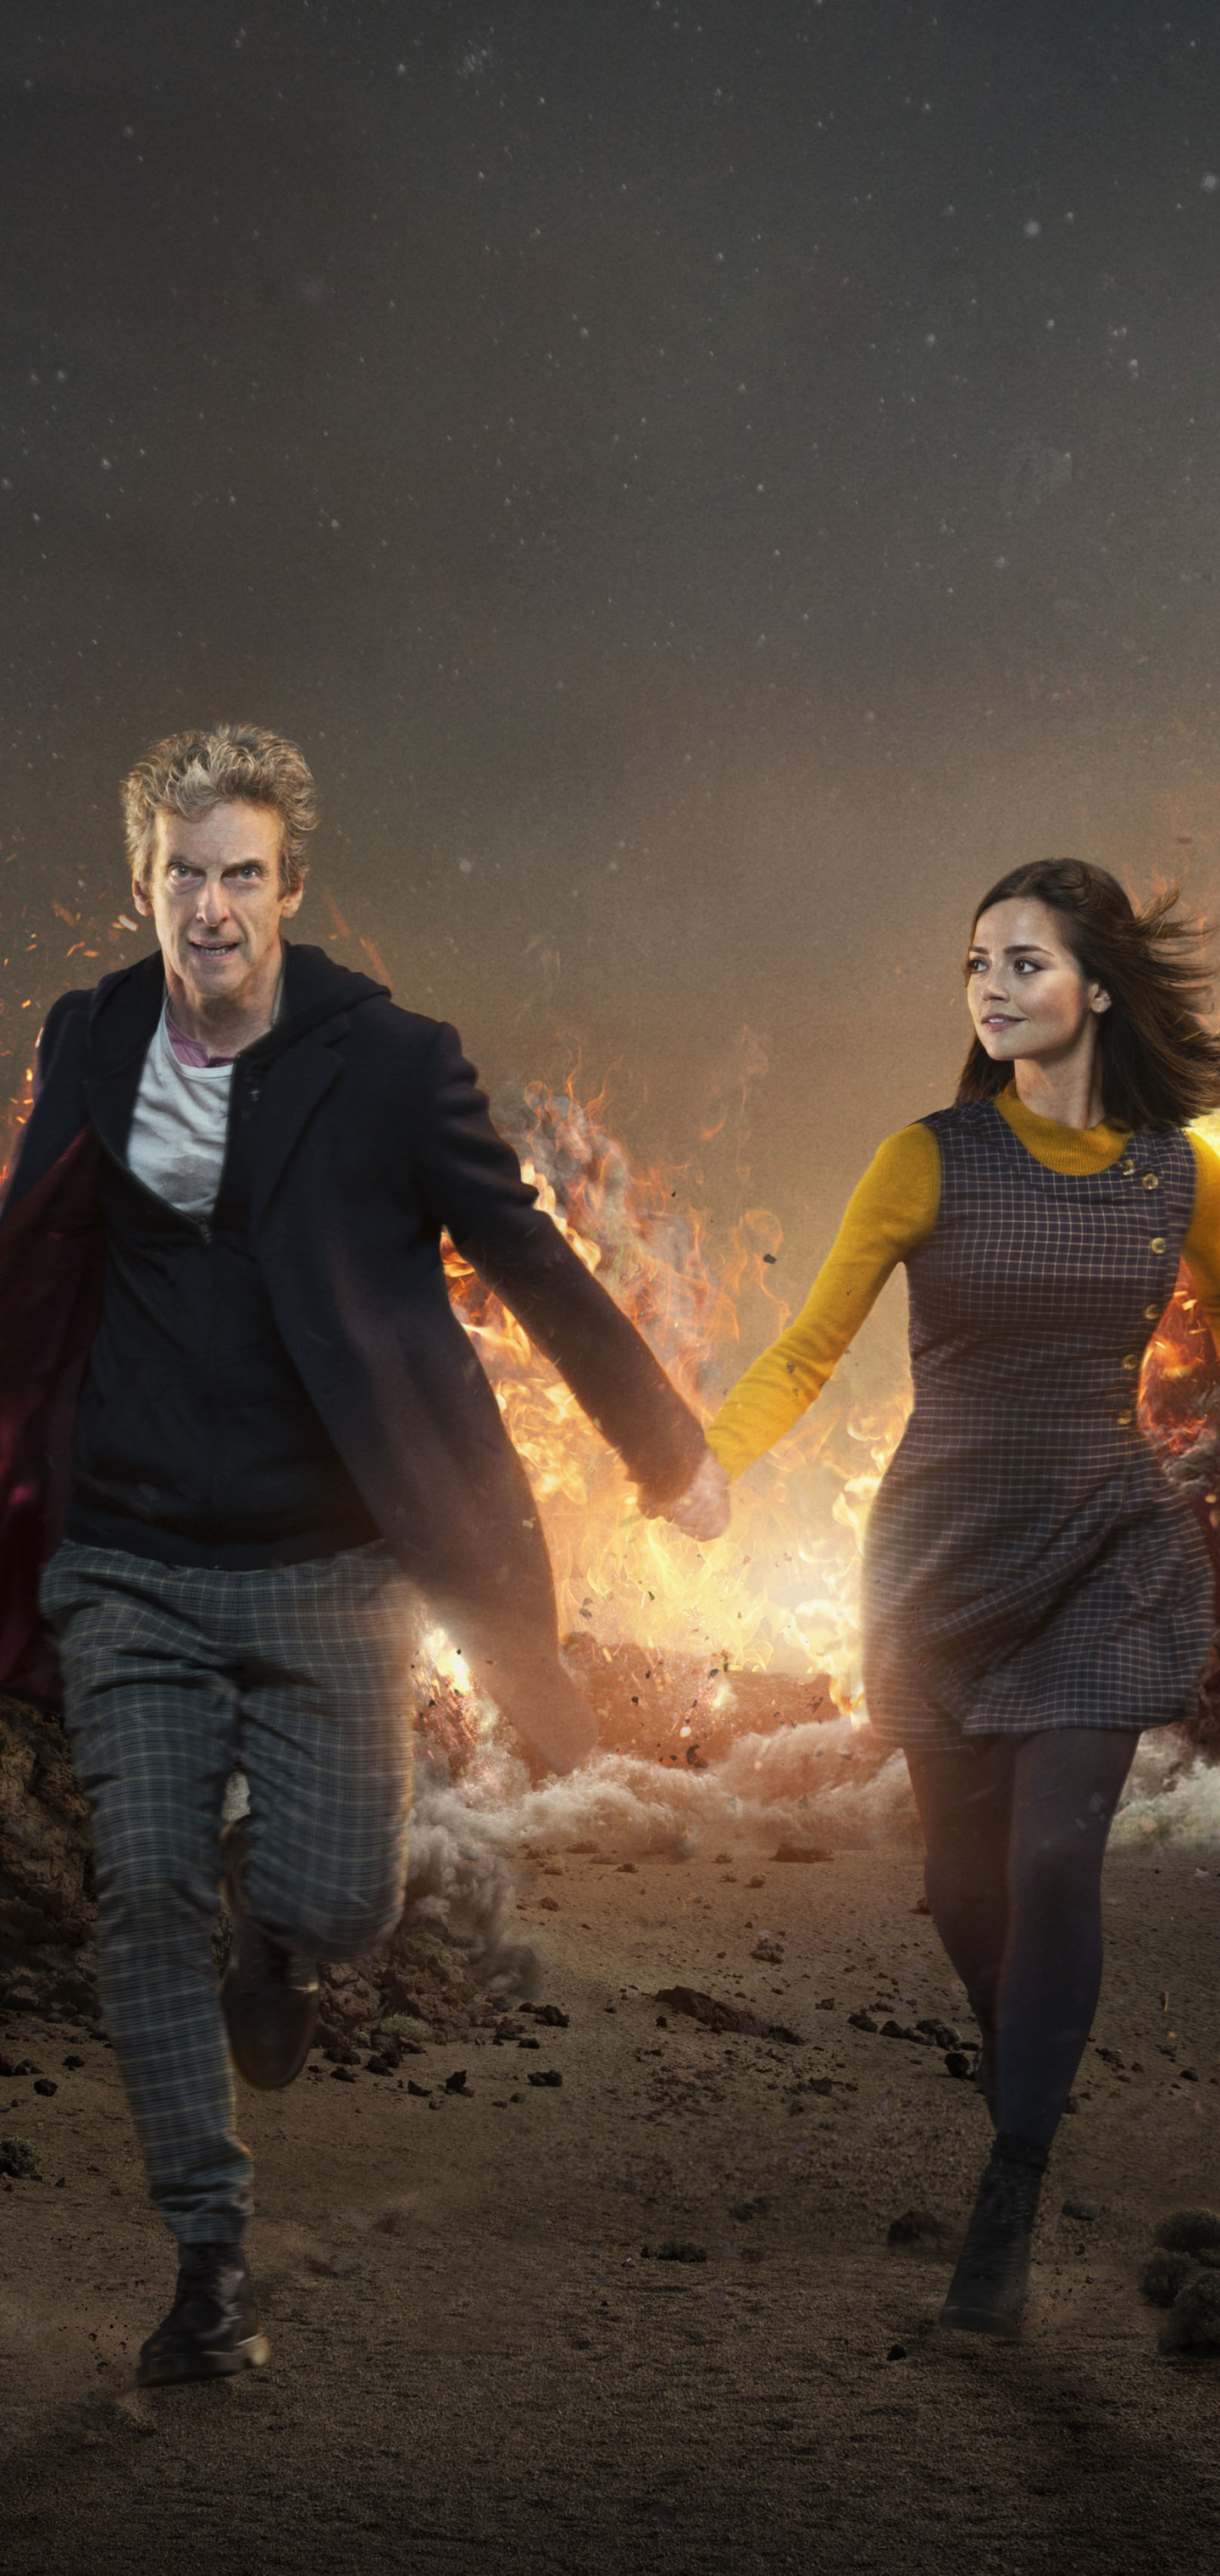 tv show, doctor who, sci fi, jenna coleman, the doctor, running, clara oswald